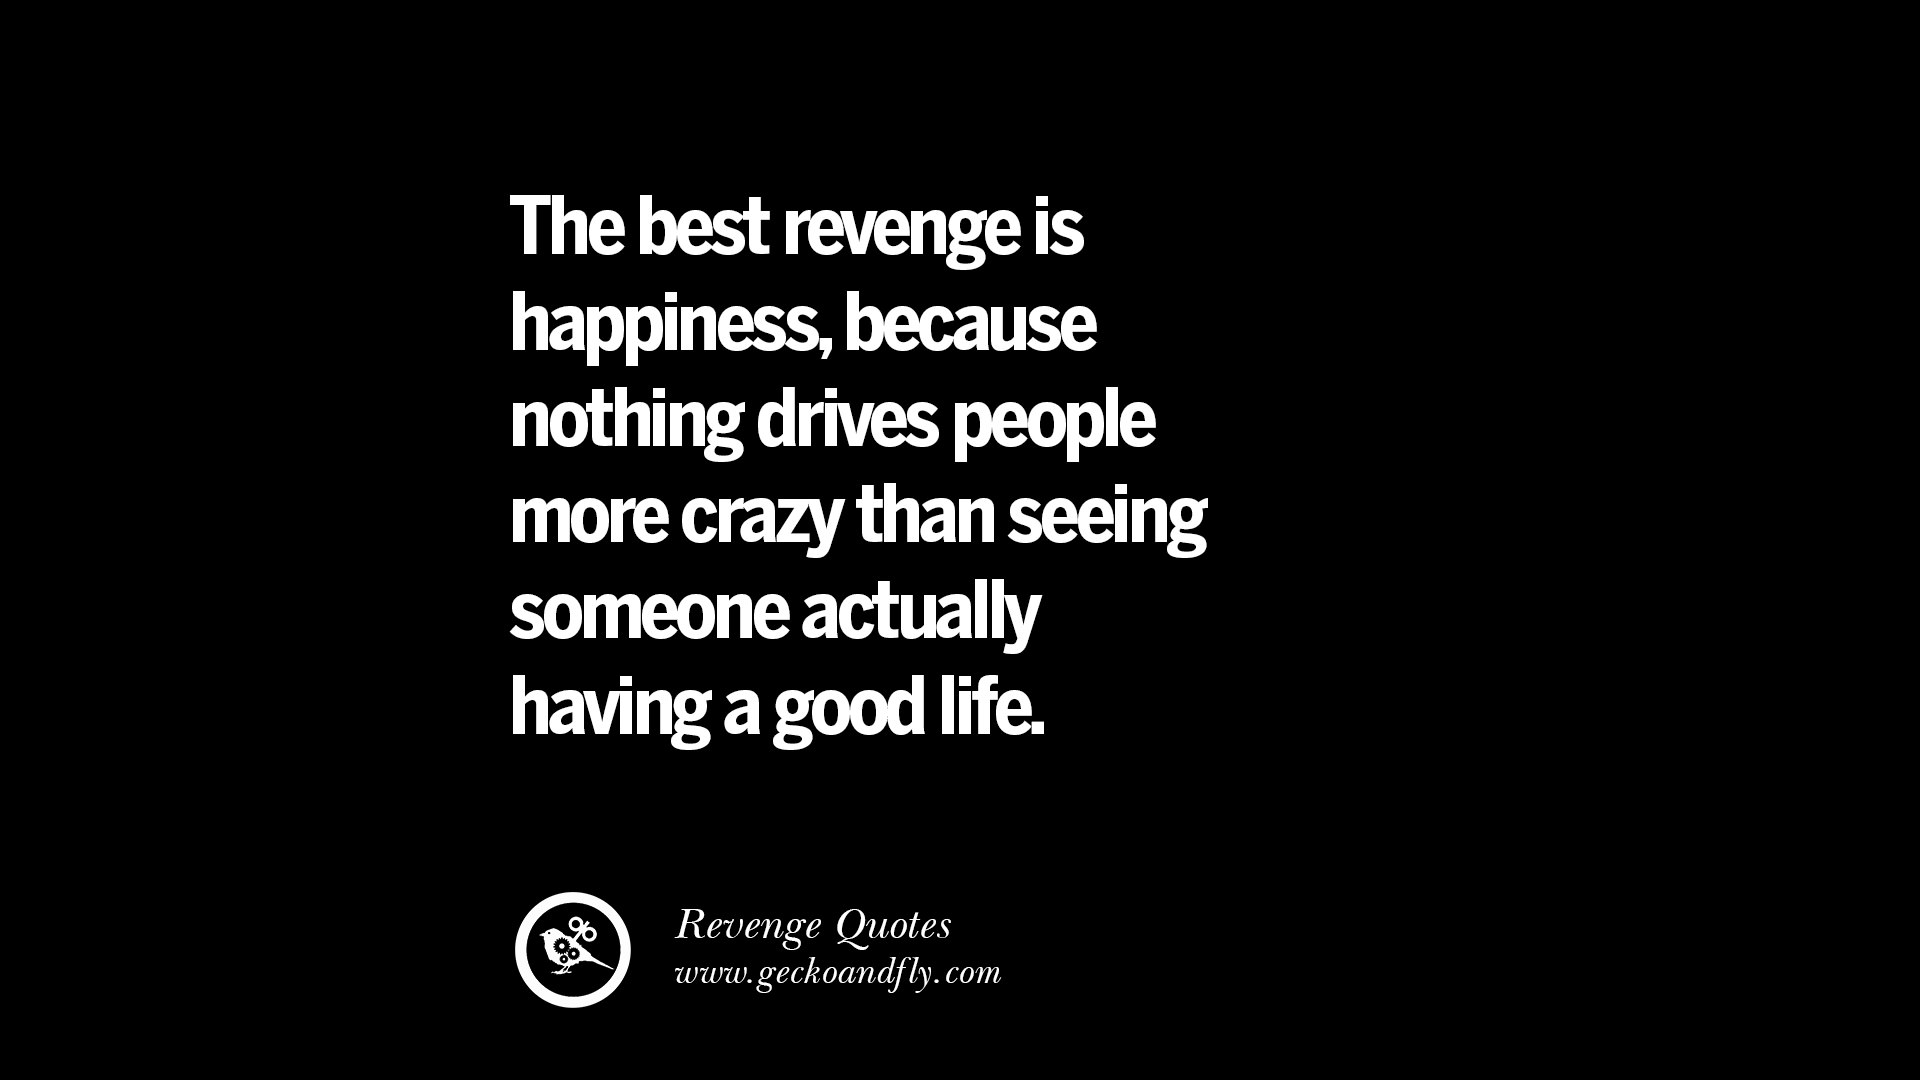 The best revenge is happiness because nothing drives people more crazy than seeing someone actually